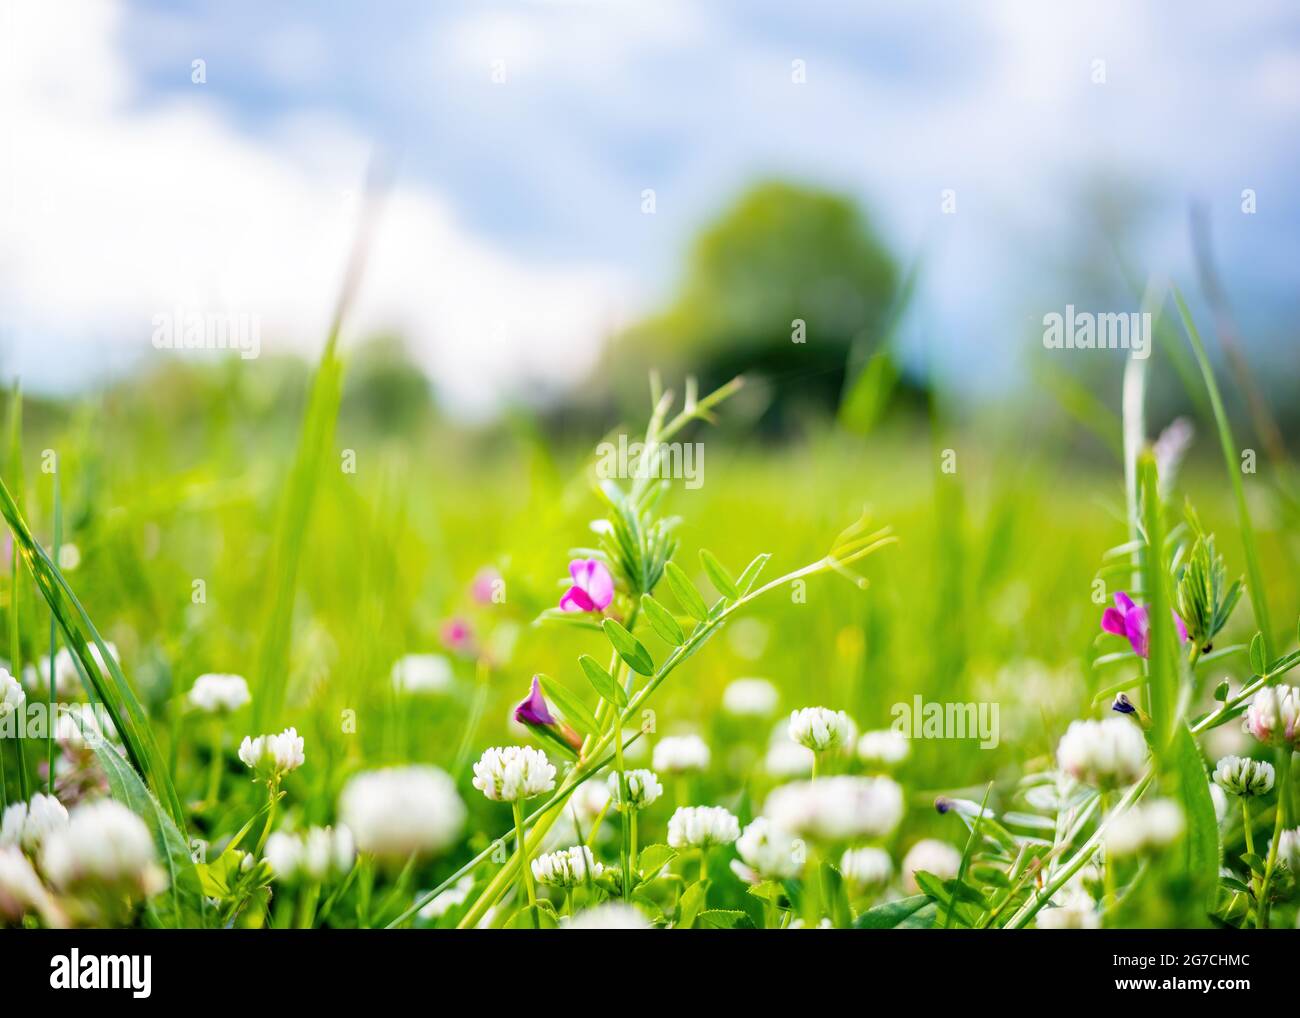 Spring or summer nature background with green grass and wildflowers Stock Photo